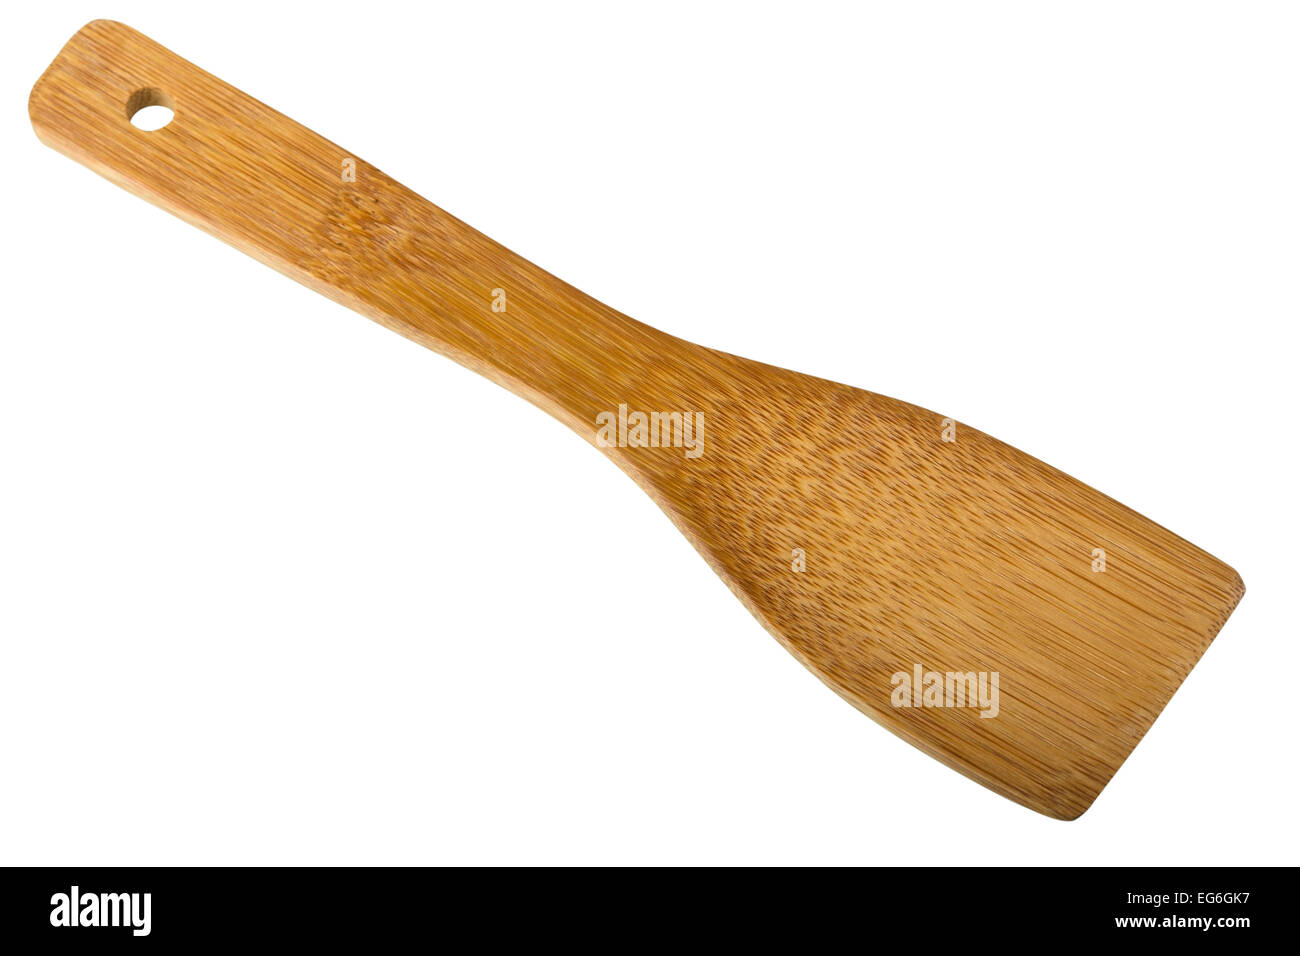 Kitchen wooden spatula isolated on white with clipping path Stock Photo